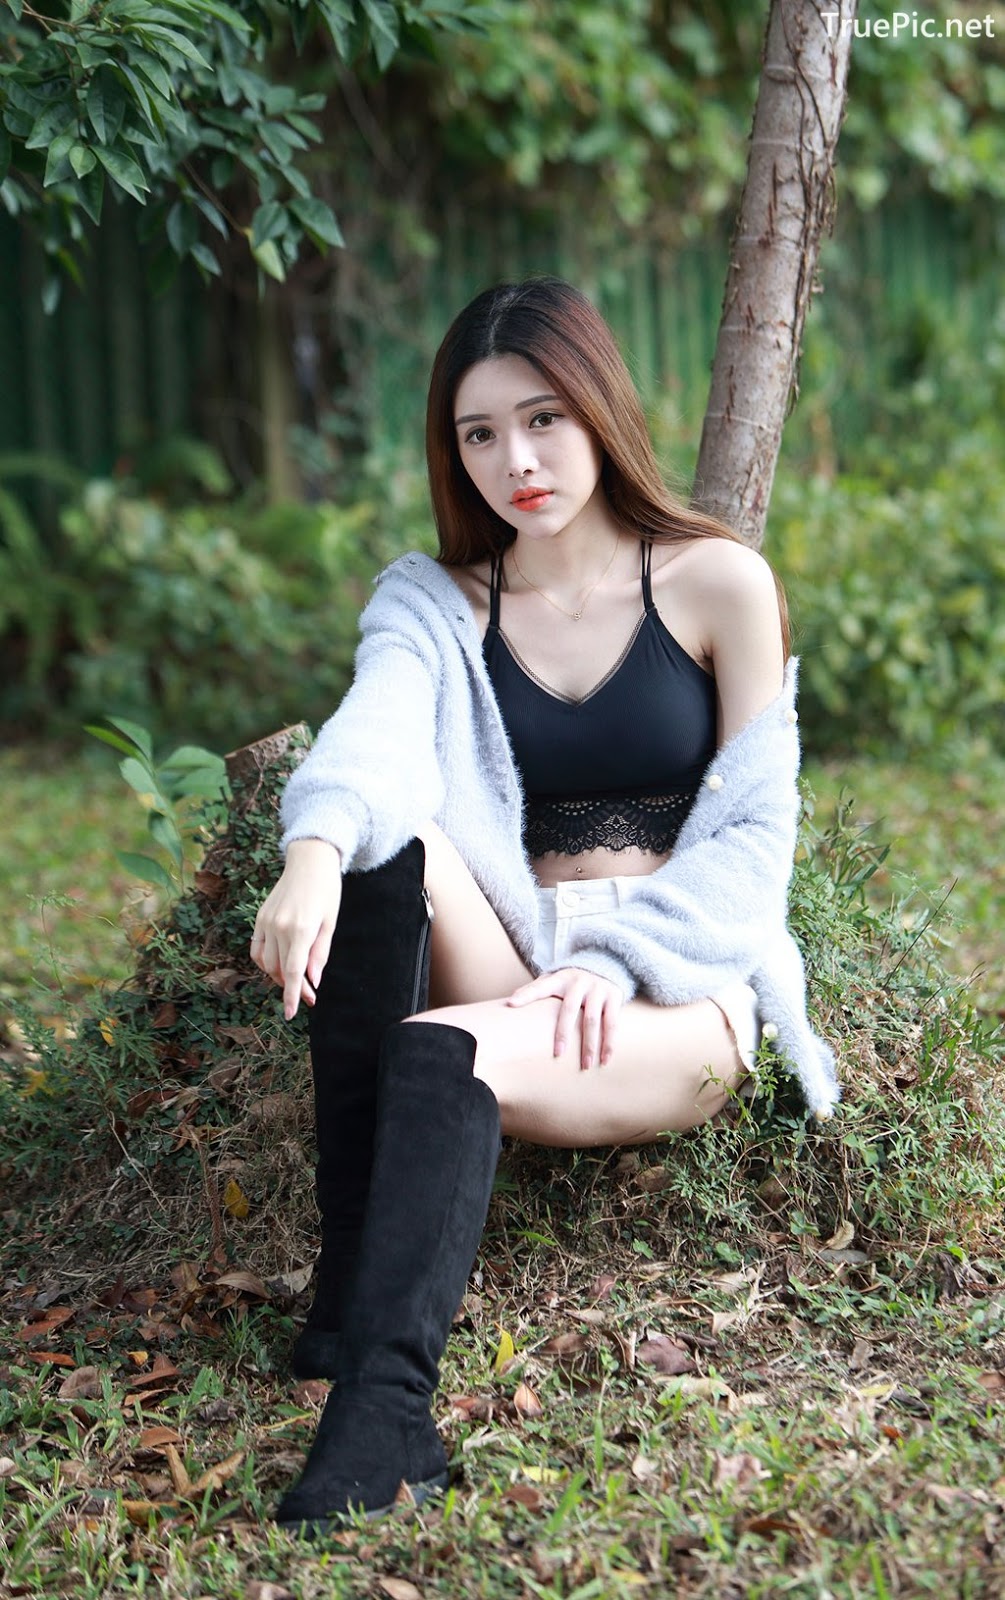 Image-Taiwanese-Model–莊舒潔–Hot-White-Short-Pants-and-Black-Crop-Top-TruePic.net- Picture-12